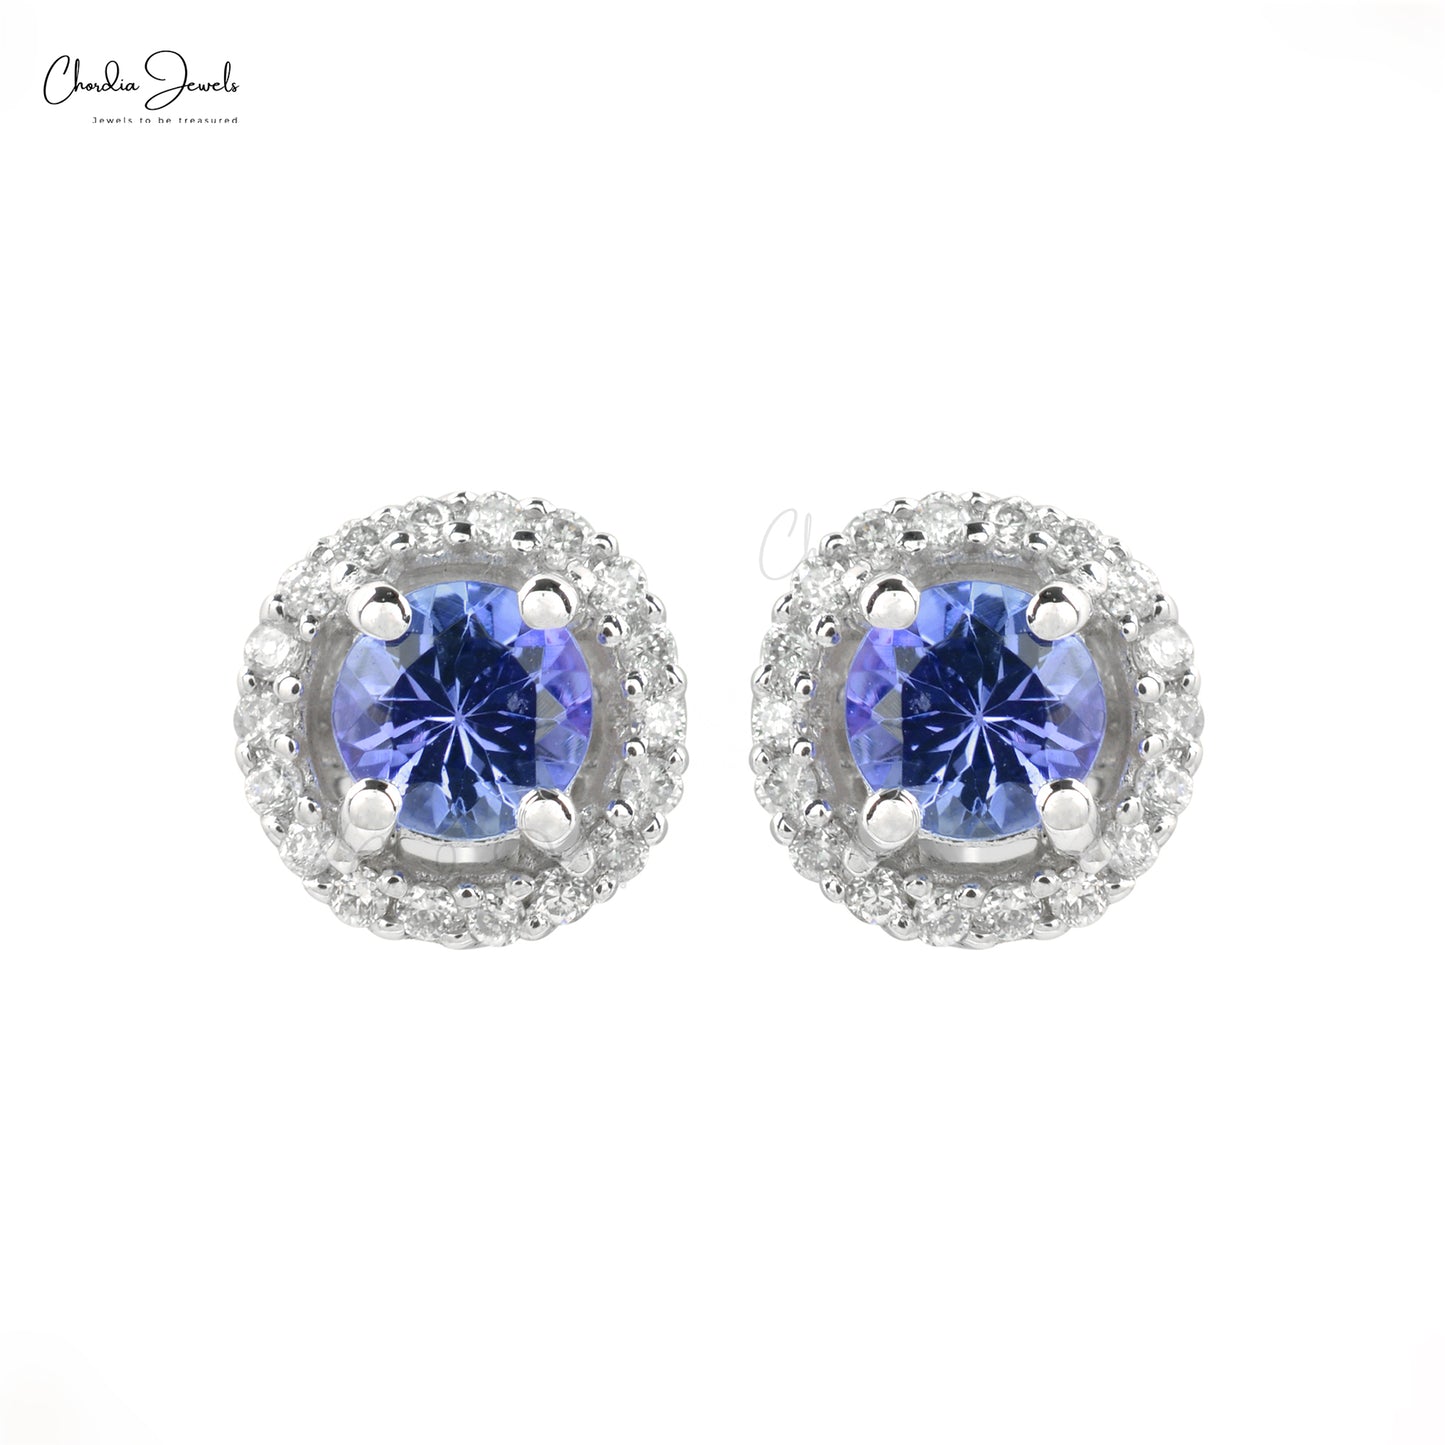 Elegant Tanzanite Diamond Halo Earrings in 14k Solid White Gold Round-Cut Delicate Studs For Gift